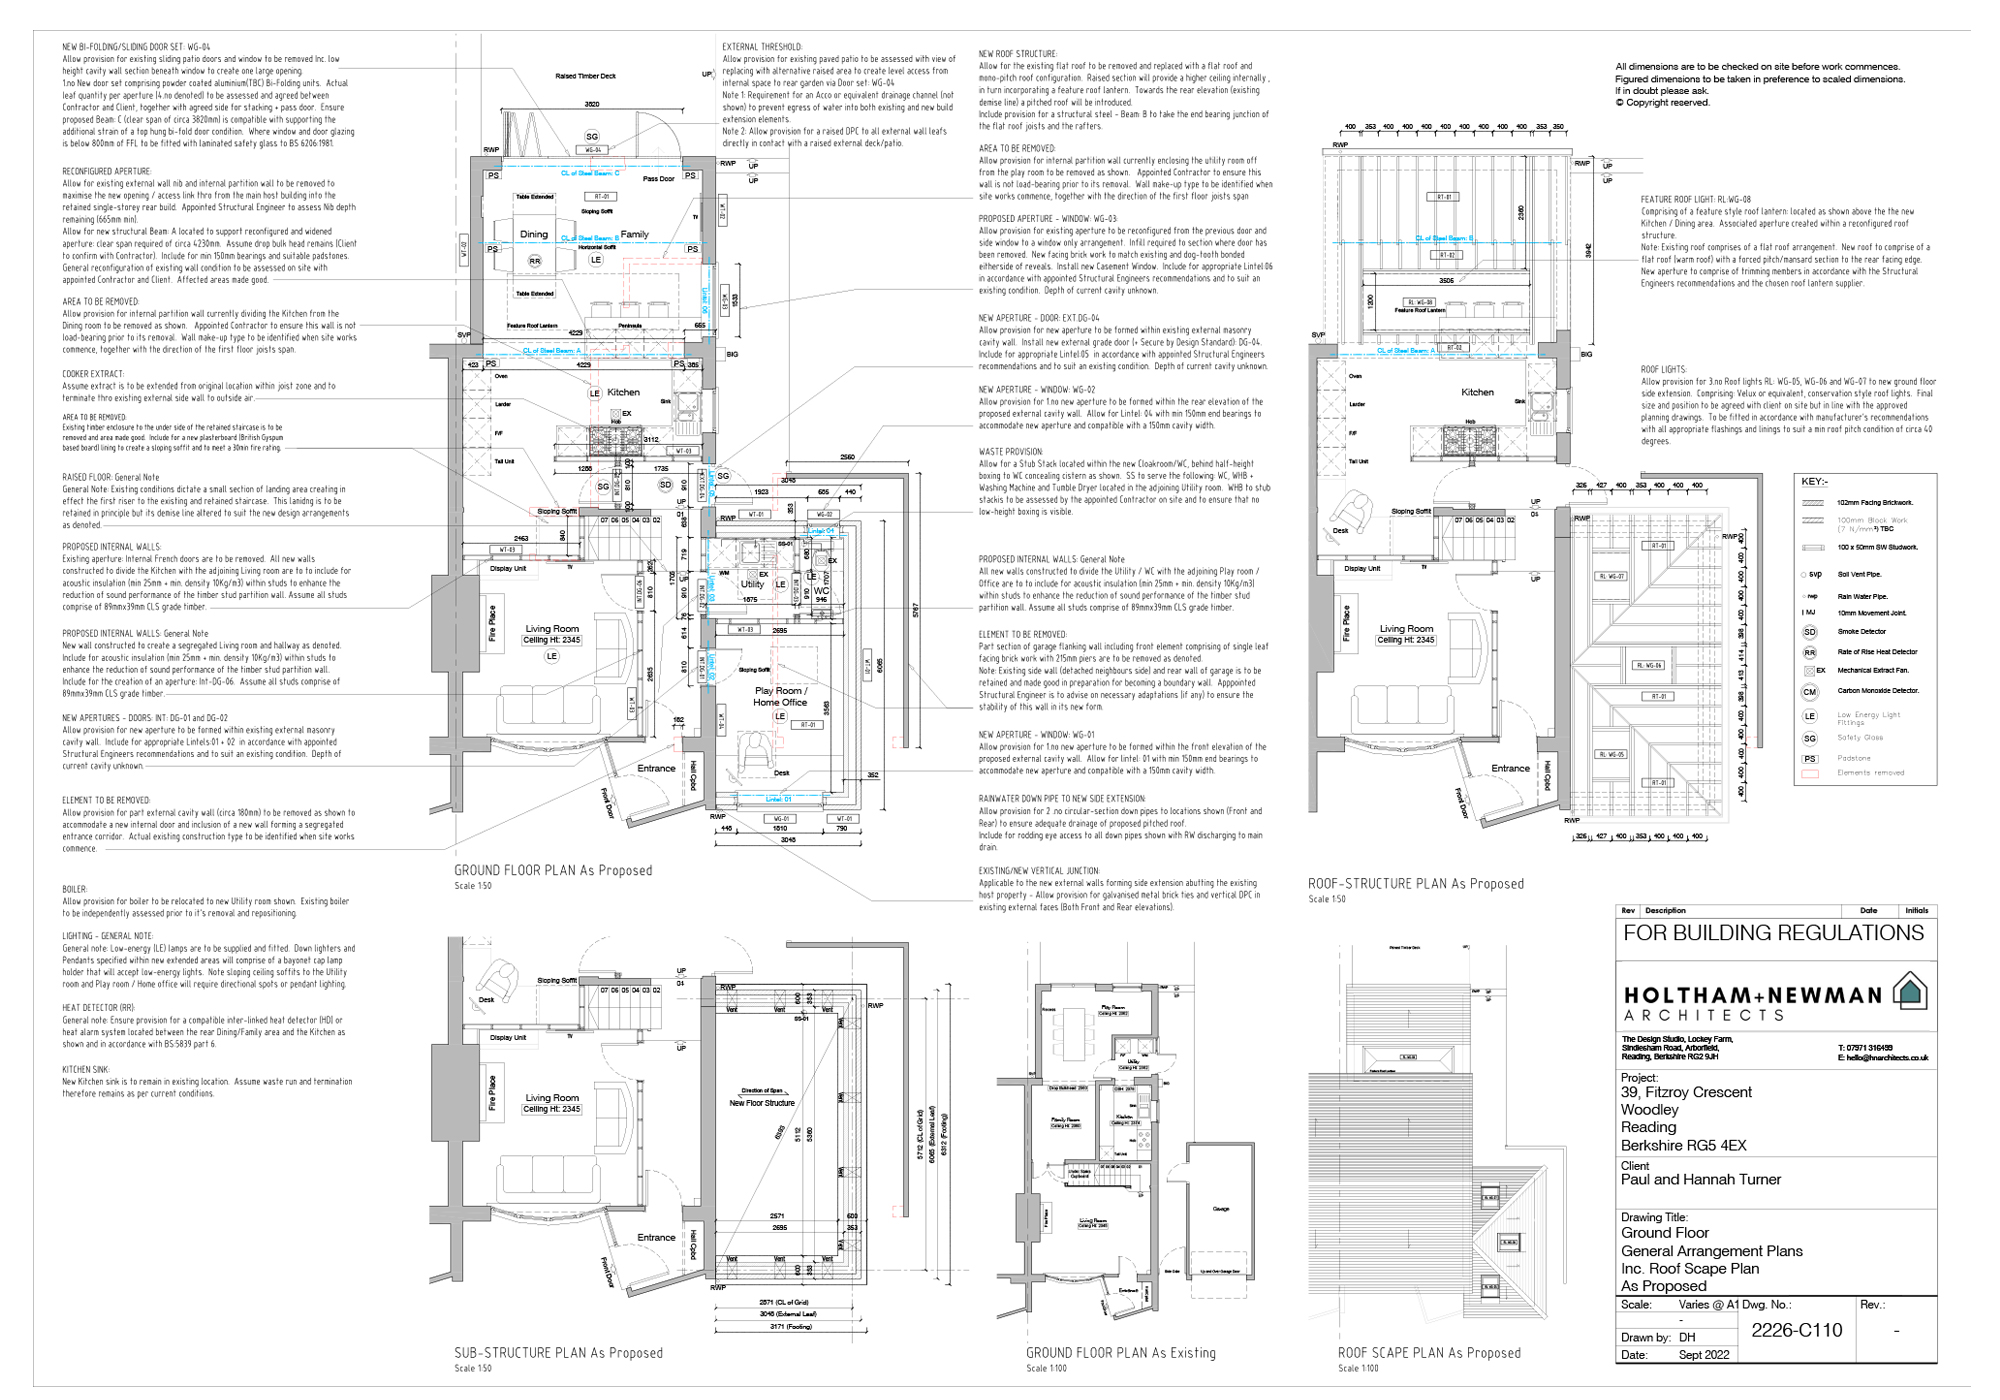 Holtham+Newman Architects will produce a comprehensive drawing package for submission to your local Council’s Building Control department or to an Approved Inspector.
We will provide all the information that is required to satisfy Building Regulation approval.
We will liaise with specialist insulation suppliers and co-ordinate with a SAP Assessor to ensure that the thermal value of the building fabric is met.
We will contact Structural Engineers that we frequently engage with to provide the sizes and specifications of all the structural steel and timber elements including beams, lintels, and roof structure.
The extent of drawing information we produce is frequently praised by appointed Contractors which in turn has created long term working relations.  The comprehensive notes and dimensions annotated ensure that the extent of work to both the existing property and extended works are fully encapsulated to avoid miss interpretation.  